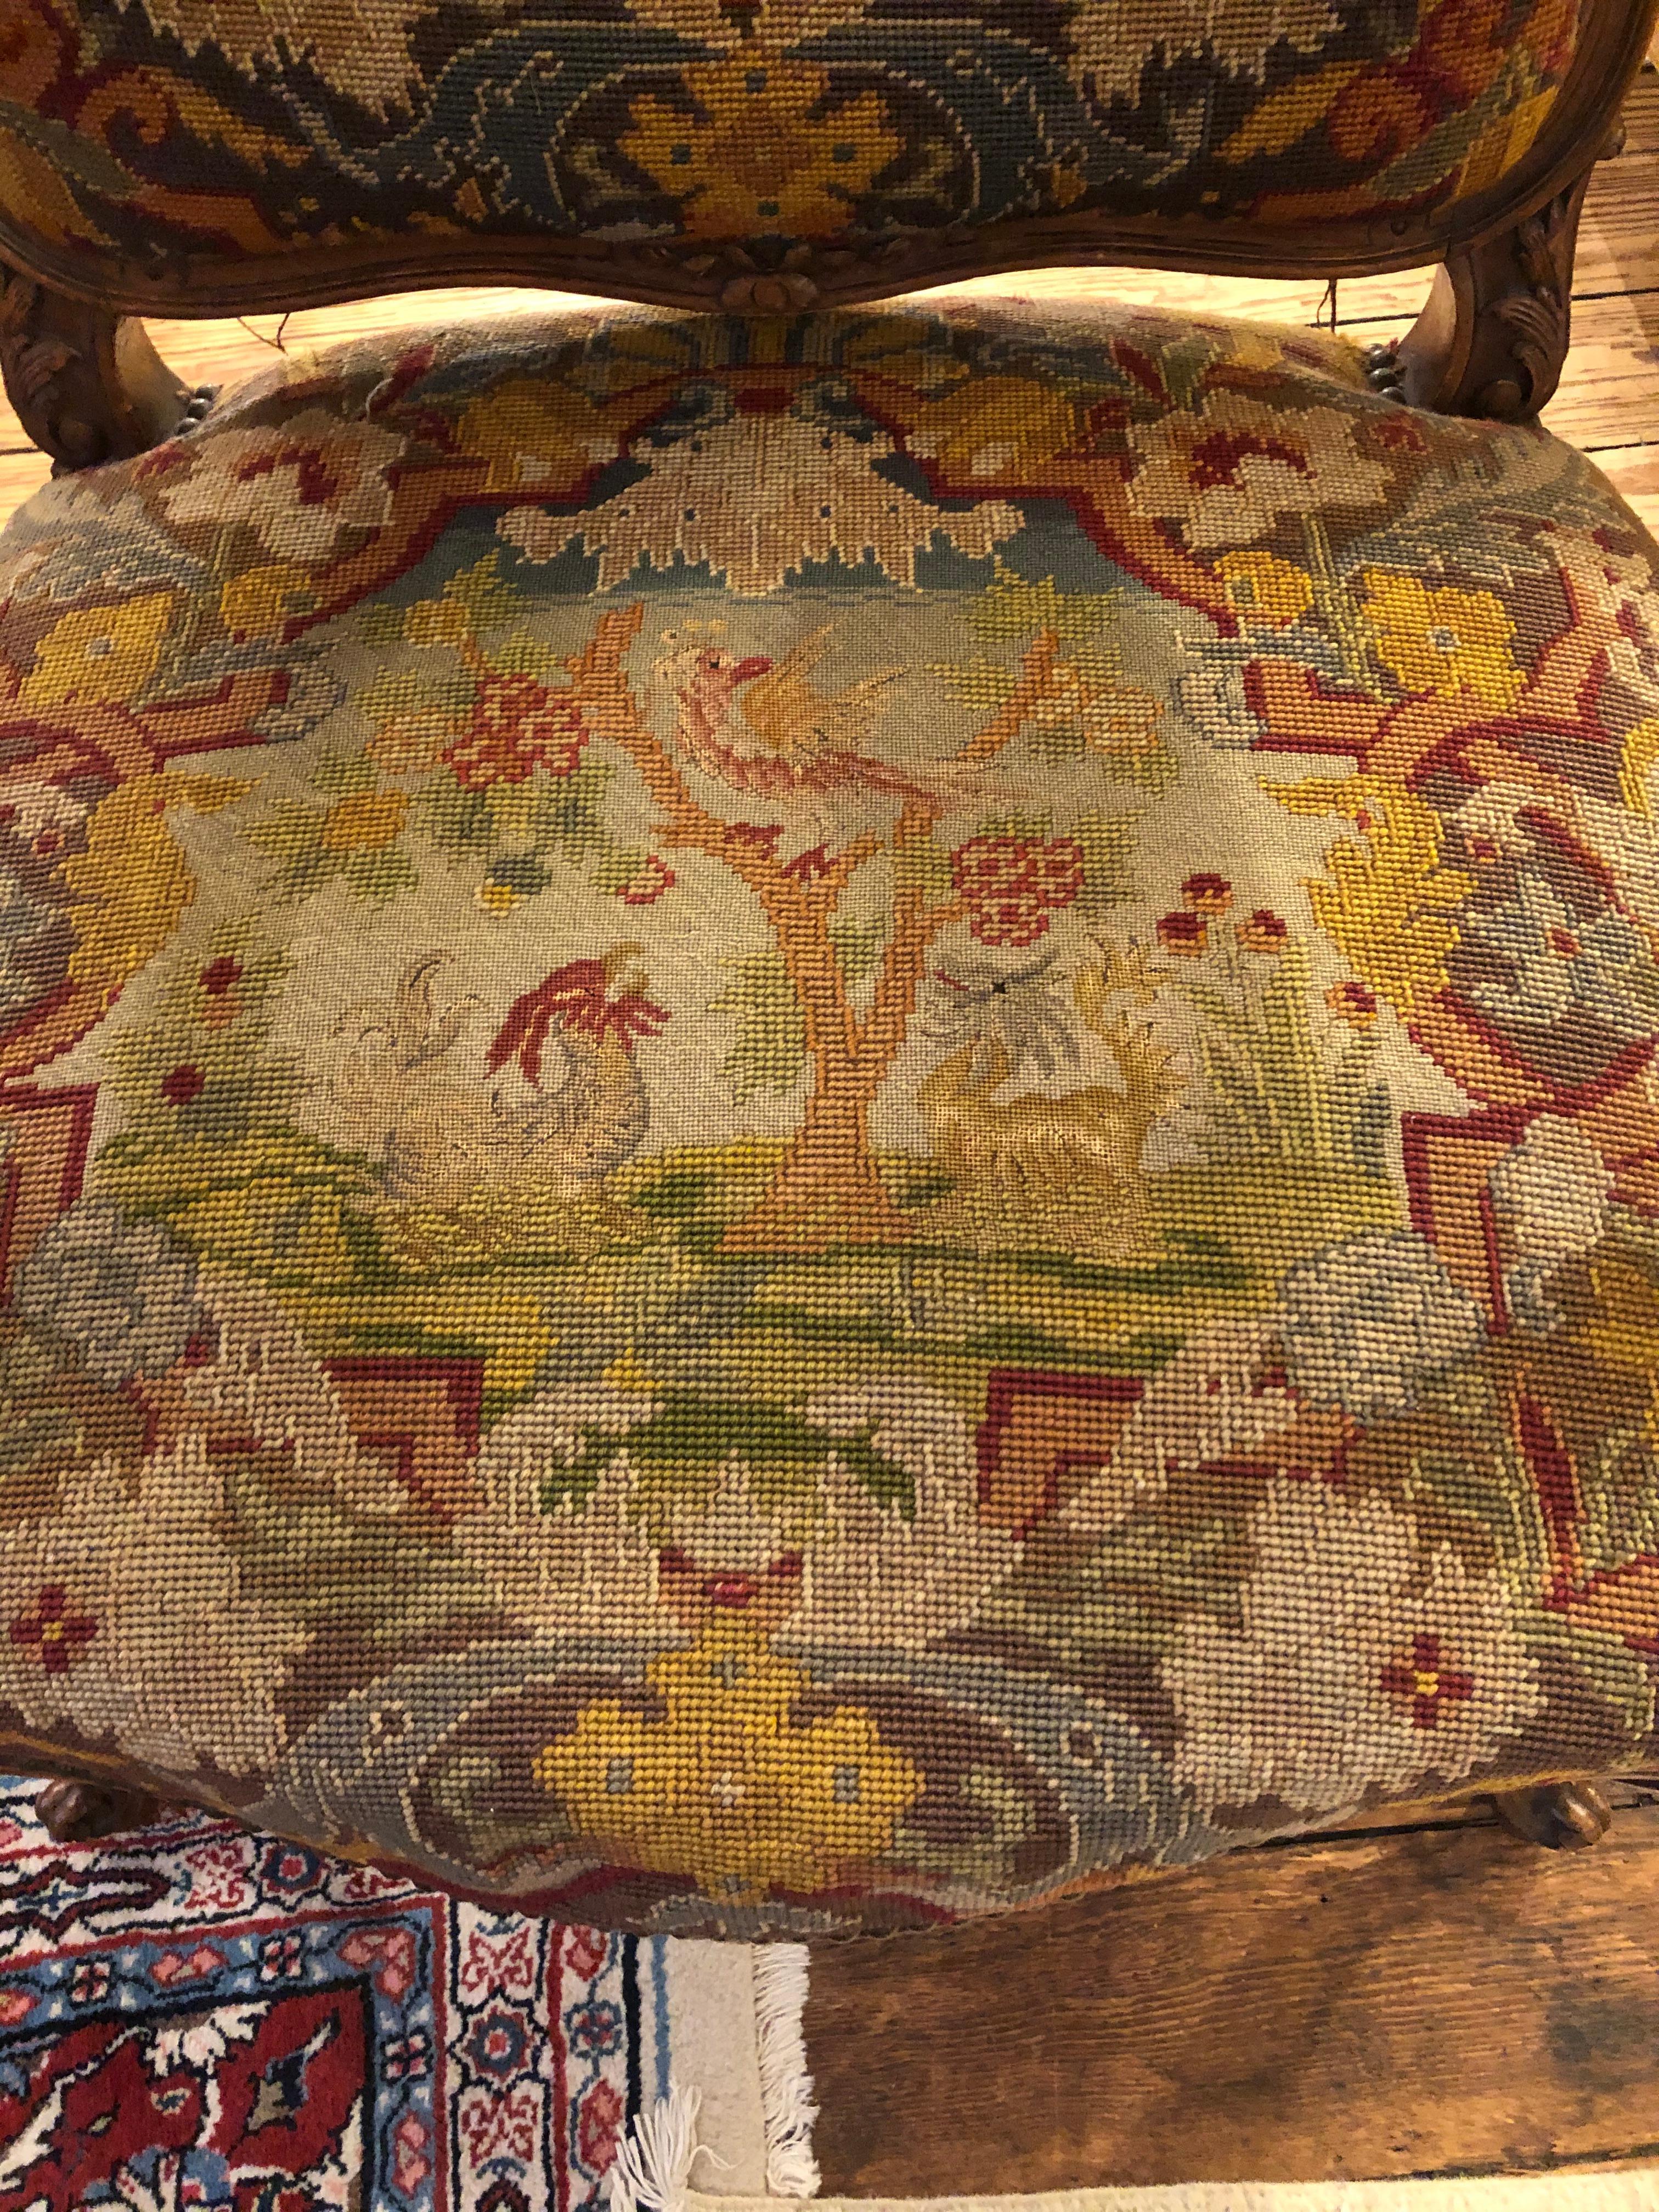 A rare gem found in a large expertly carved walnut Louis XVI armchair with original magnificent figural tapestry upholstery finished with nailheads. The back of the chair is left in worn condition and needs upholstery.
Measures: Arm height 27
Seat